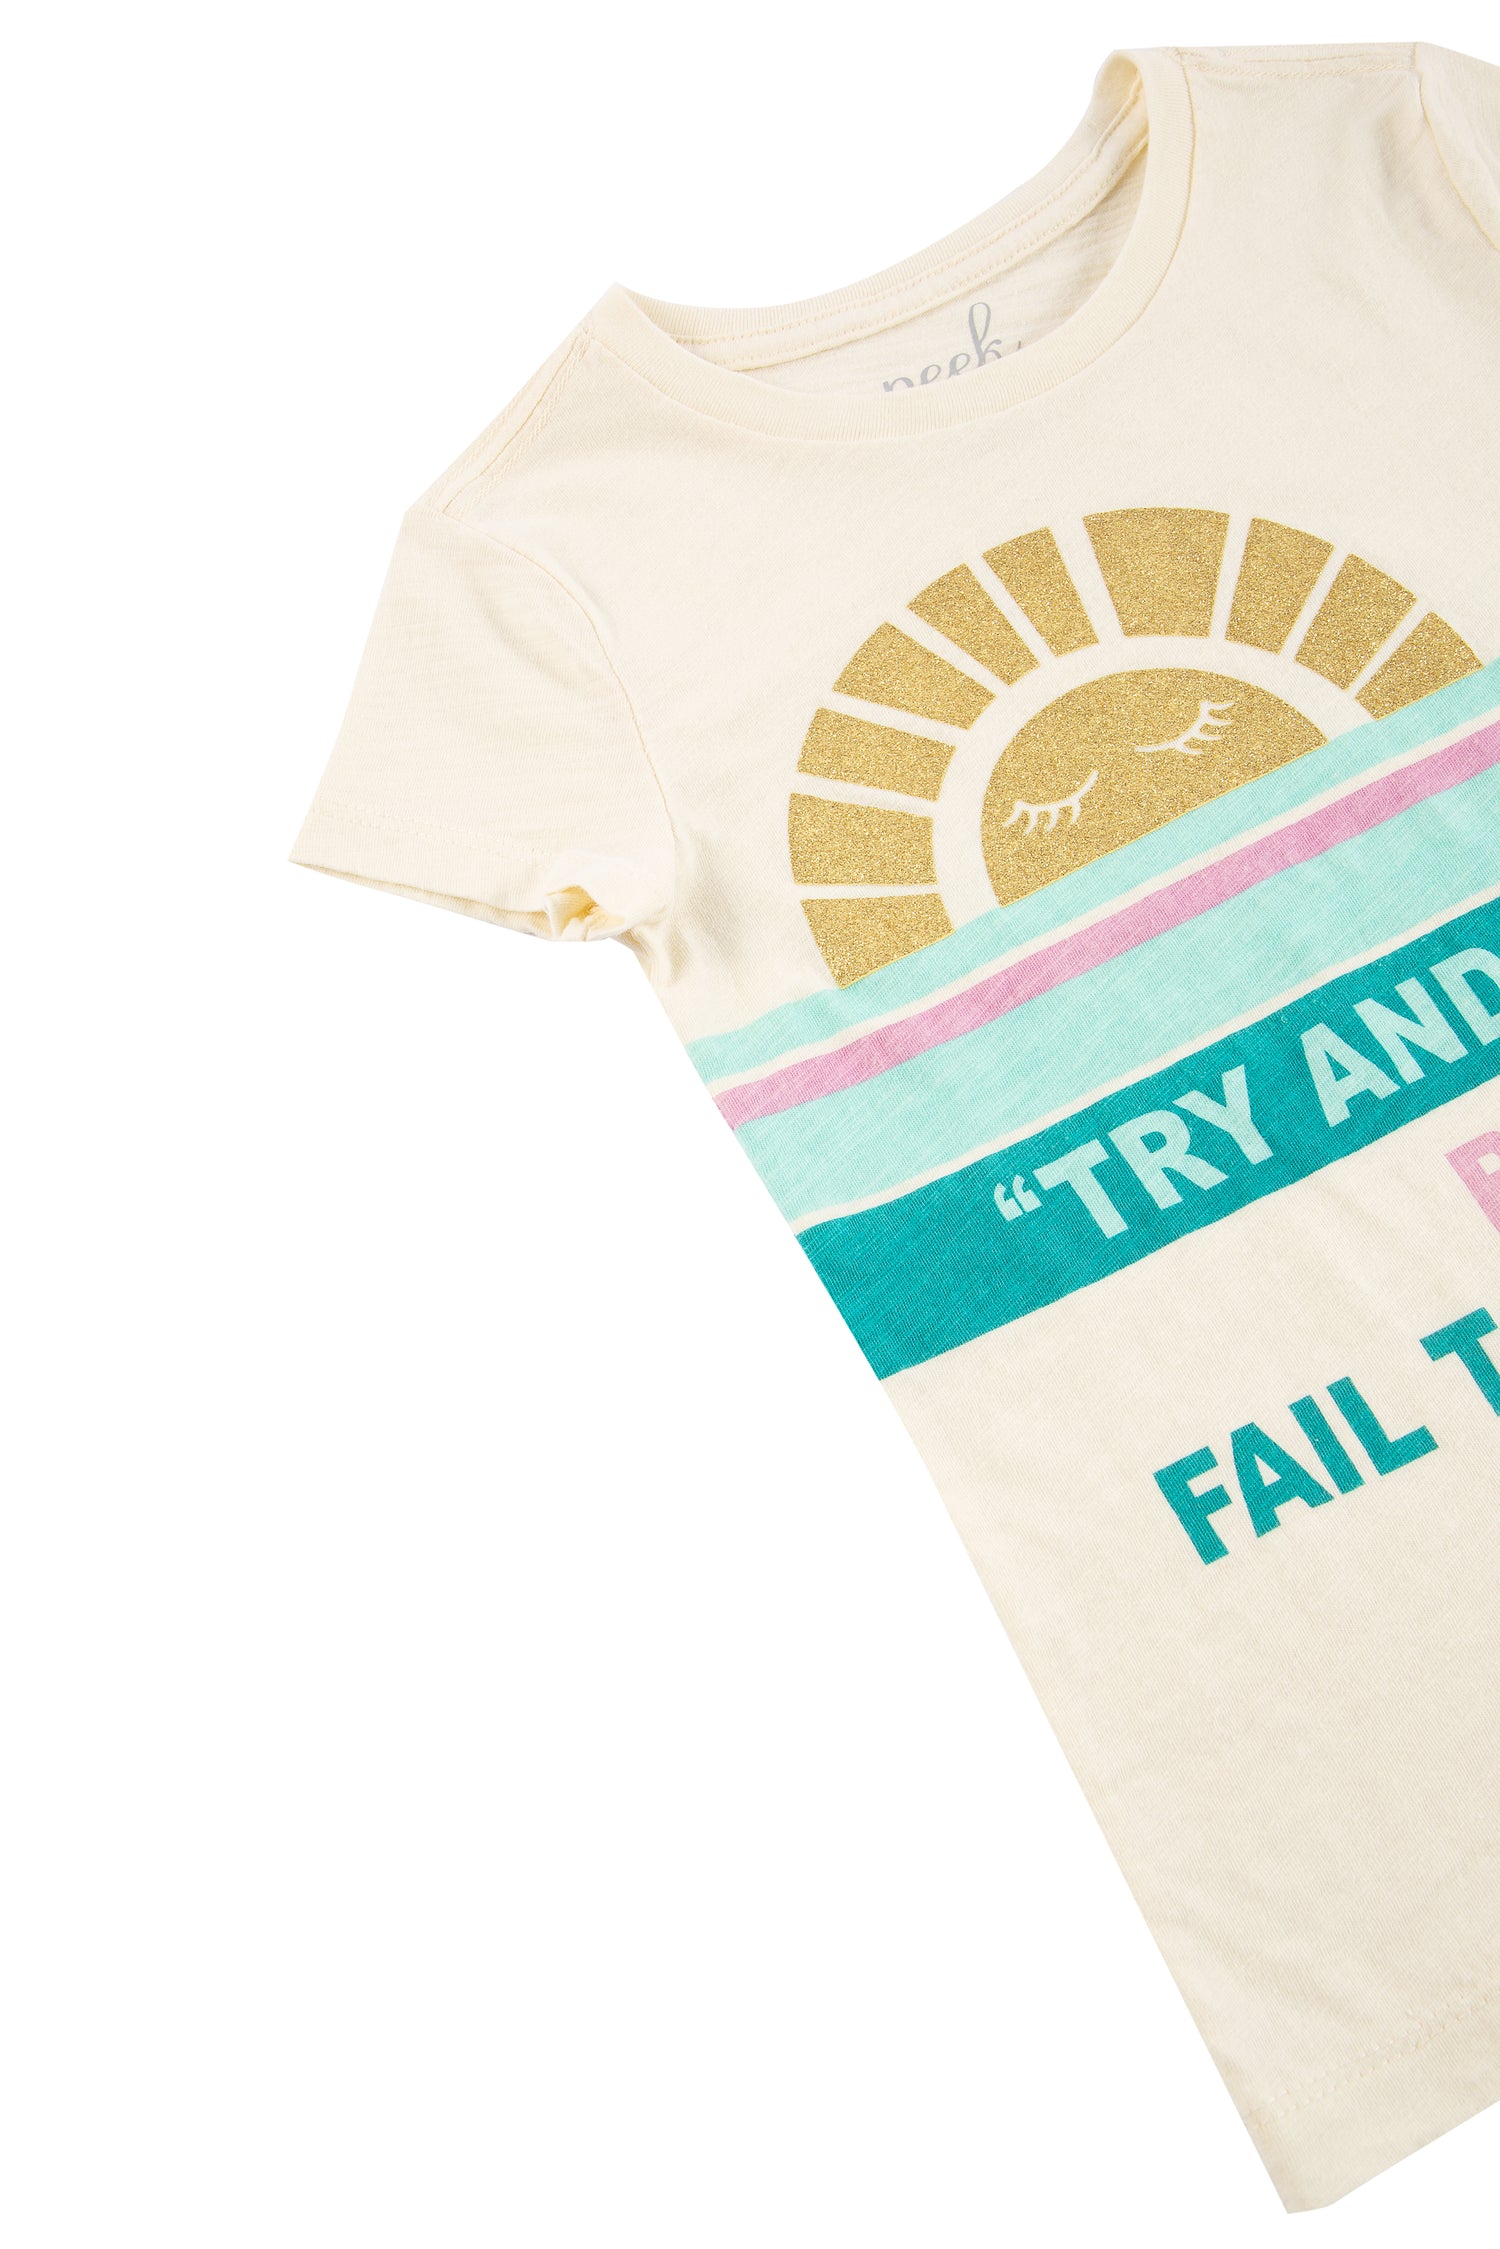 CLOSE UP OF PALE YELLOW T-SHIRT WITH GREEN STRIPES ACROSS THE CENTER, A SUN GRAPHIC AND "TRY AND FAIL BUT DON'T FAIL TO TRY"